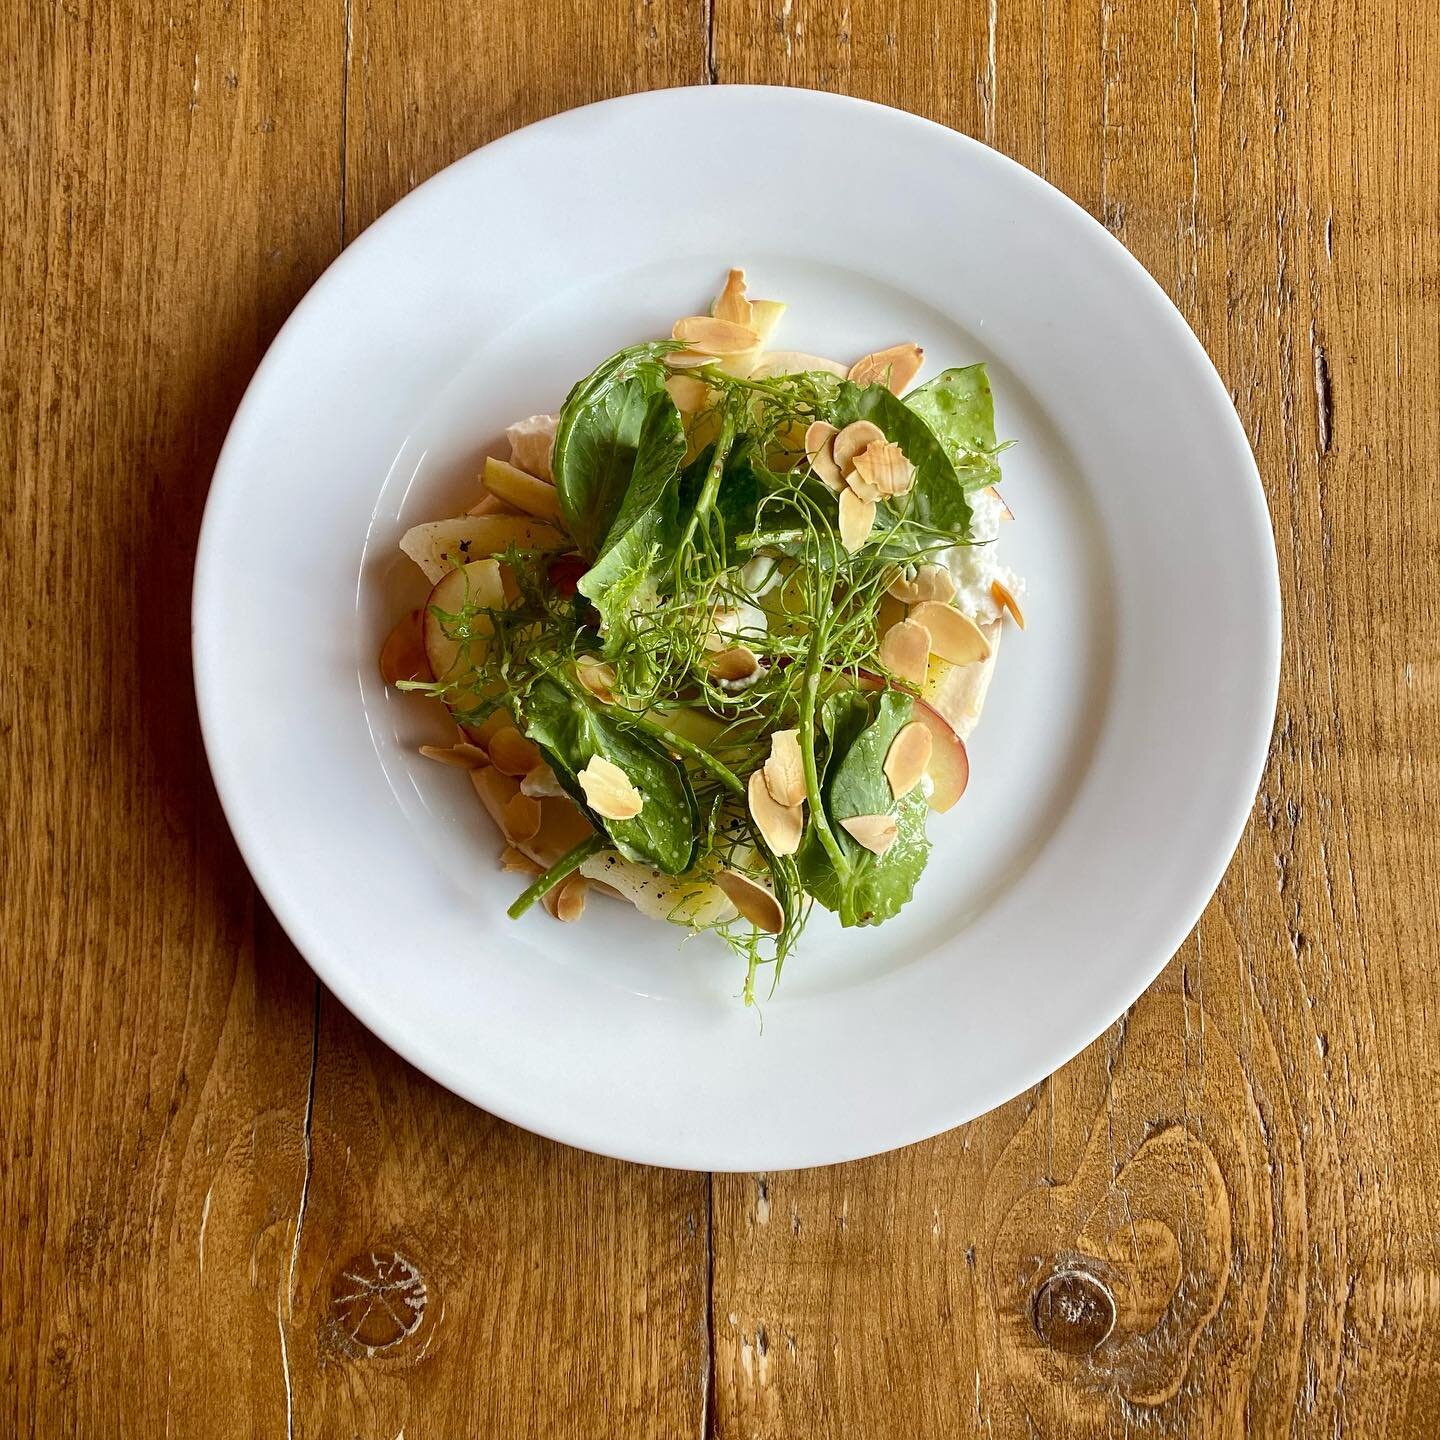 🌱Salad of Pea shoots, Leeks, Almonds, Apple &amp; Goat&rsquo;s Curd 🌱Come and try it for yourself, we&rsquo;ve got some tables spare so book yourself in online or give us a call 🥂